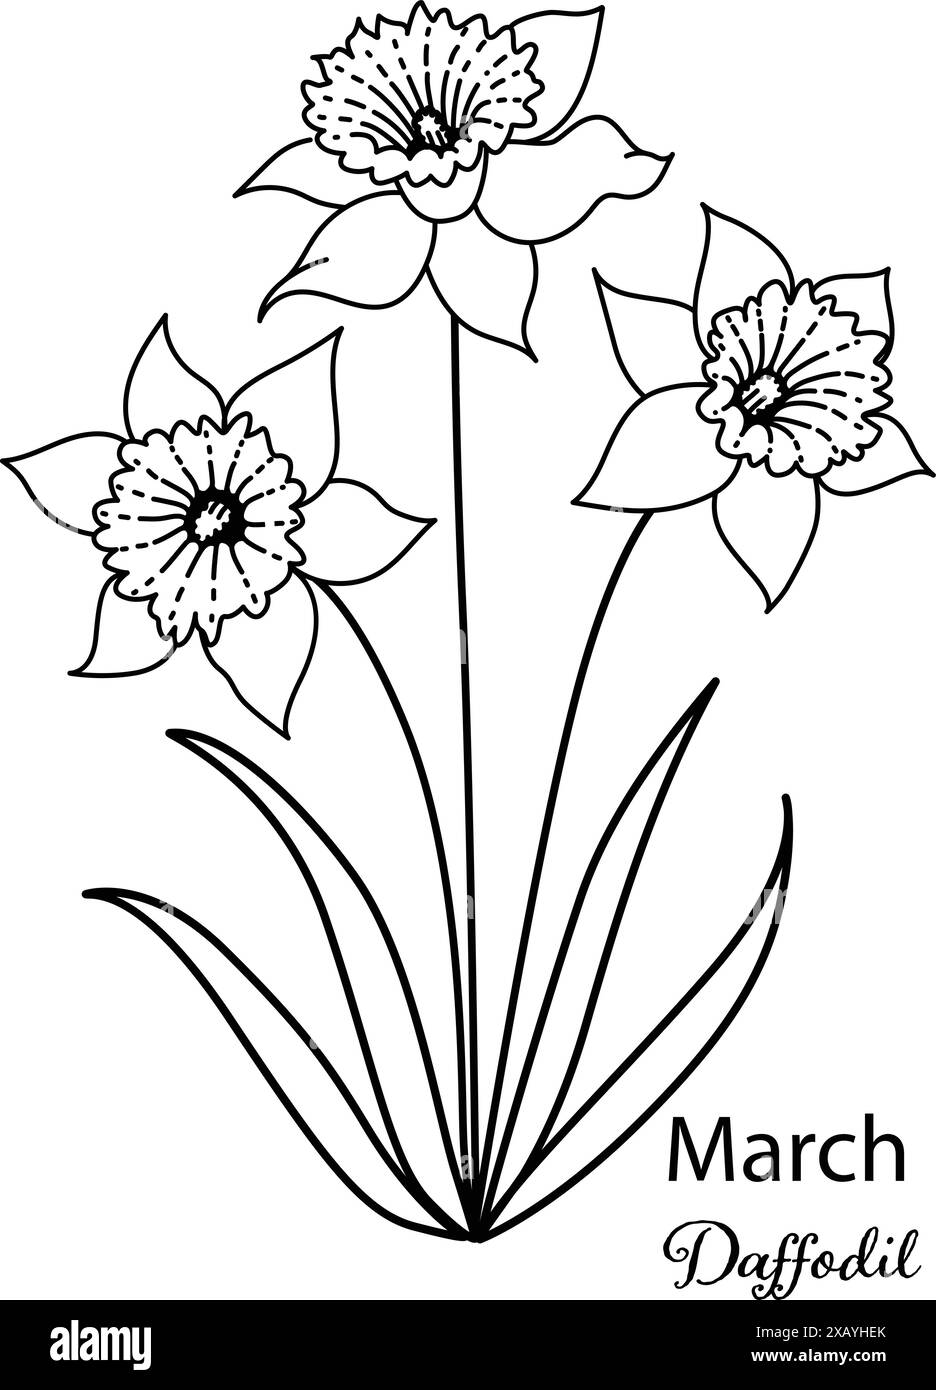 Birth month flower of March is Daffodil flower for printing engraving, laser cut, coloring and so on. Vecter illustration. Stock Vector